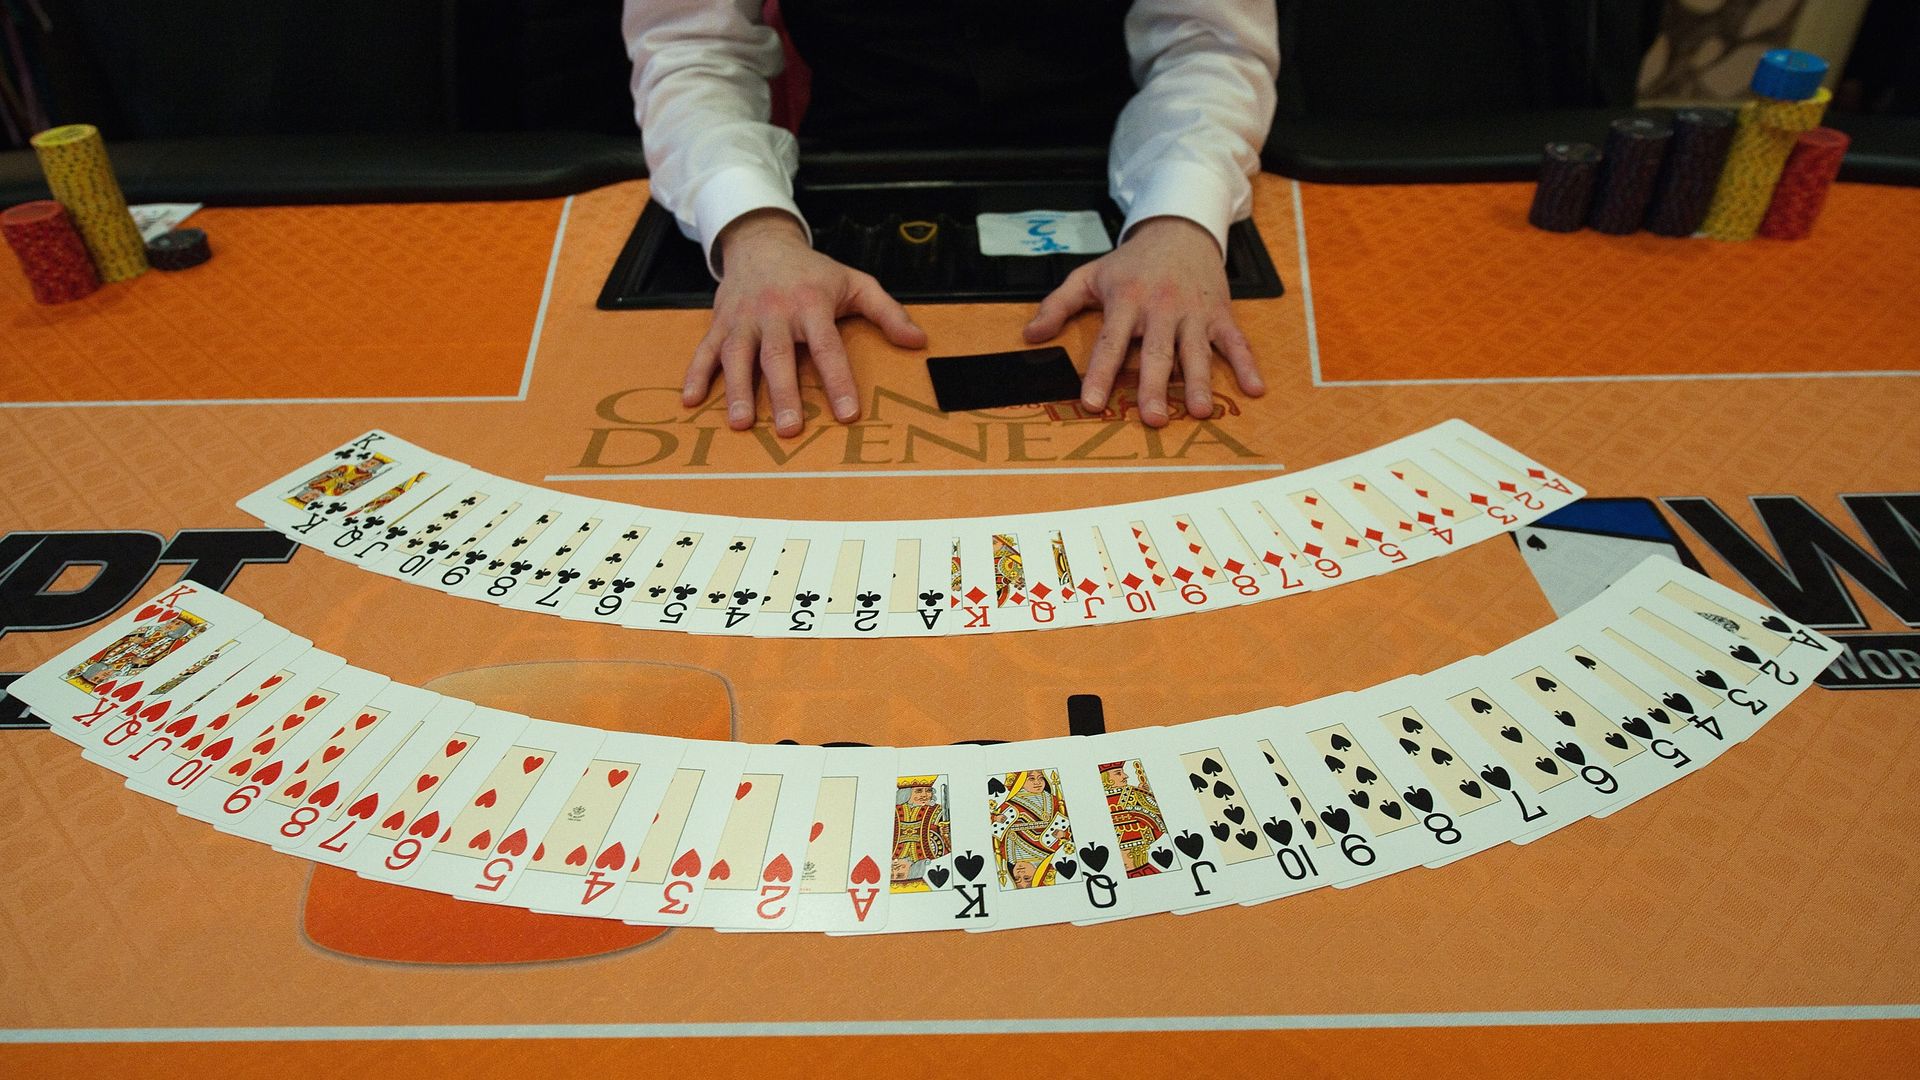 A Croupier shows poker cards during the opening of the World Poker Tour (WPT) tournament.